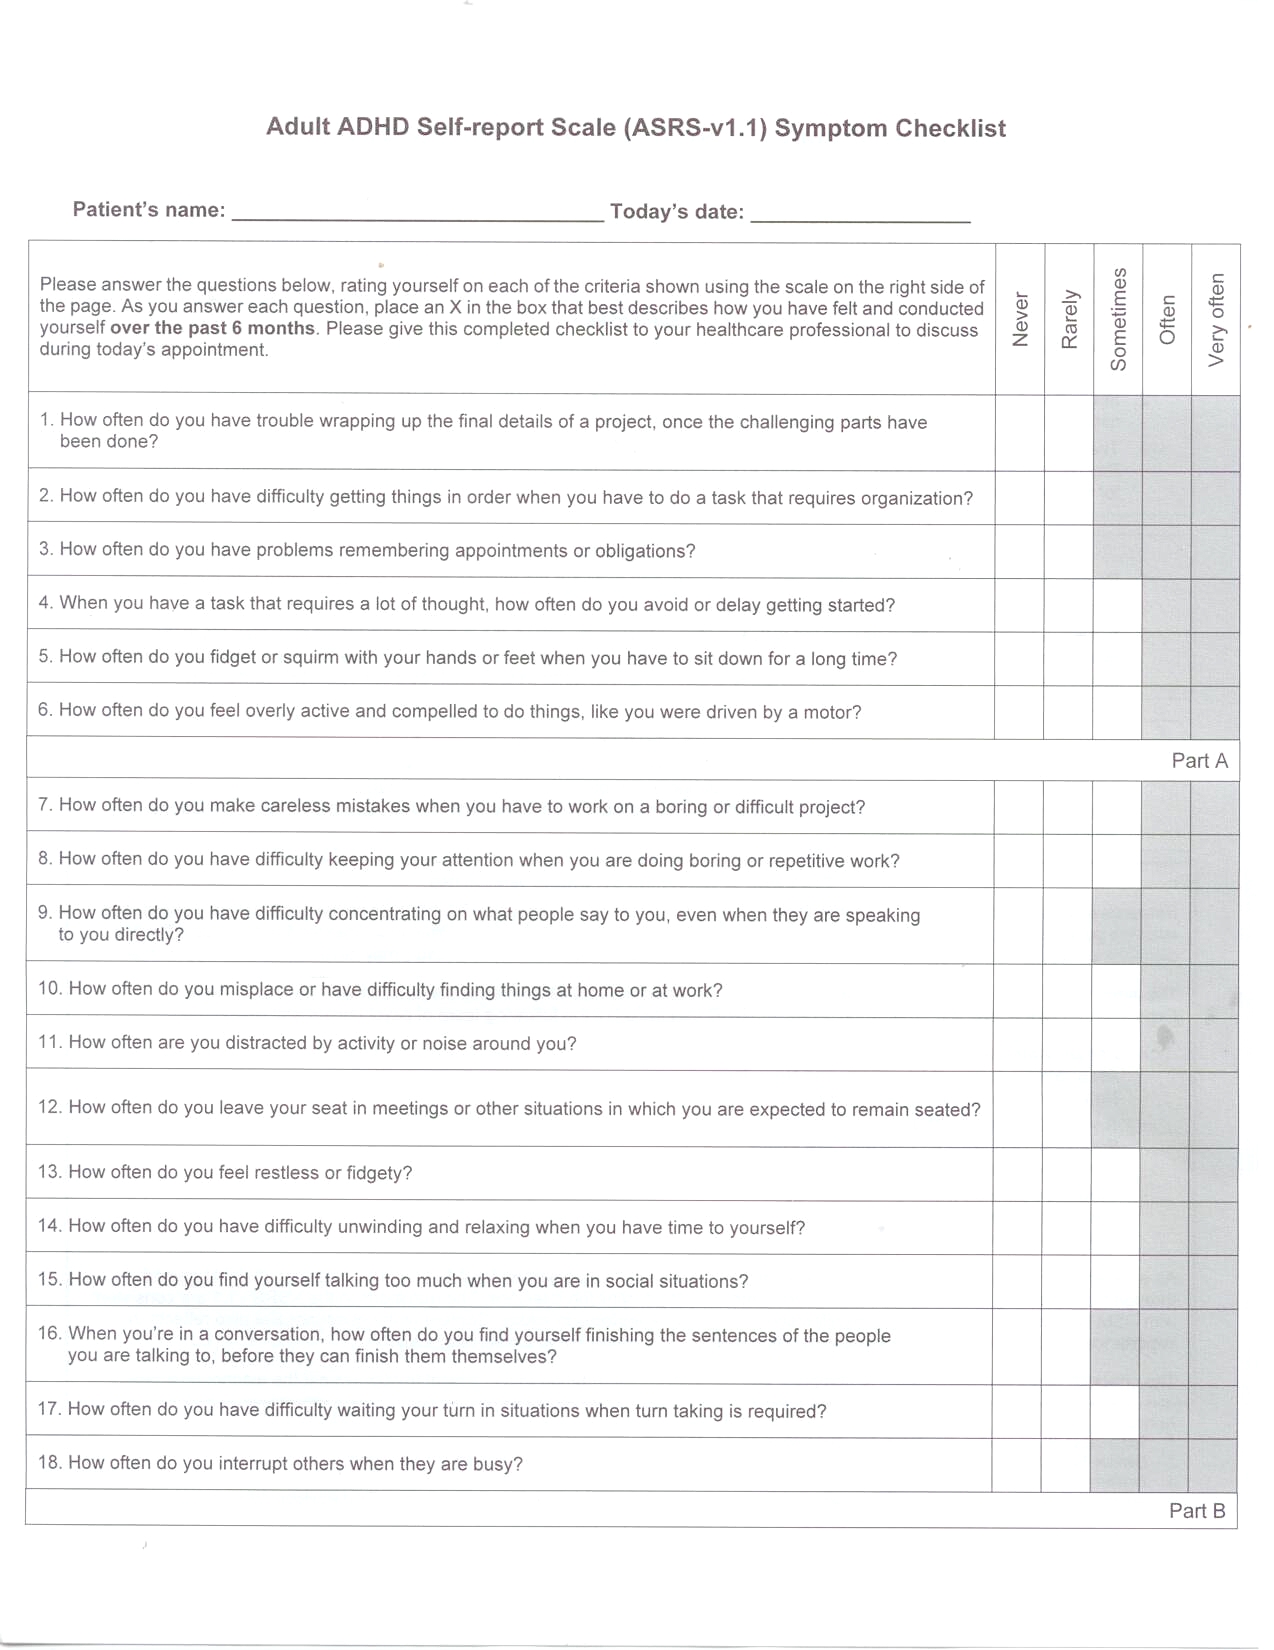 Adult Add Questionaire 115